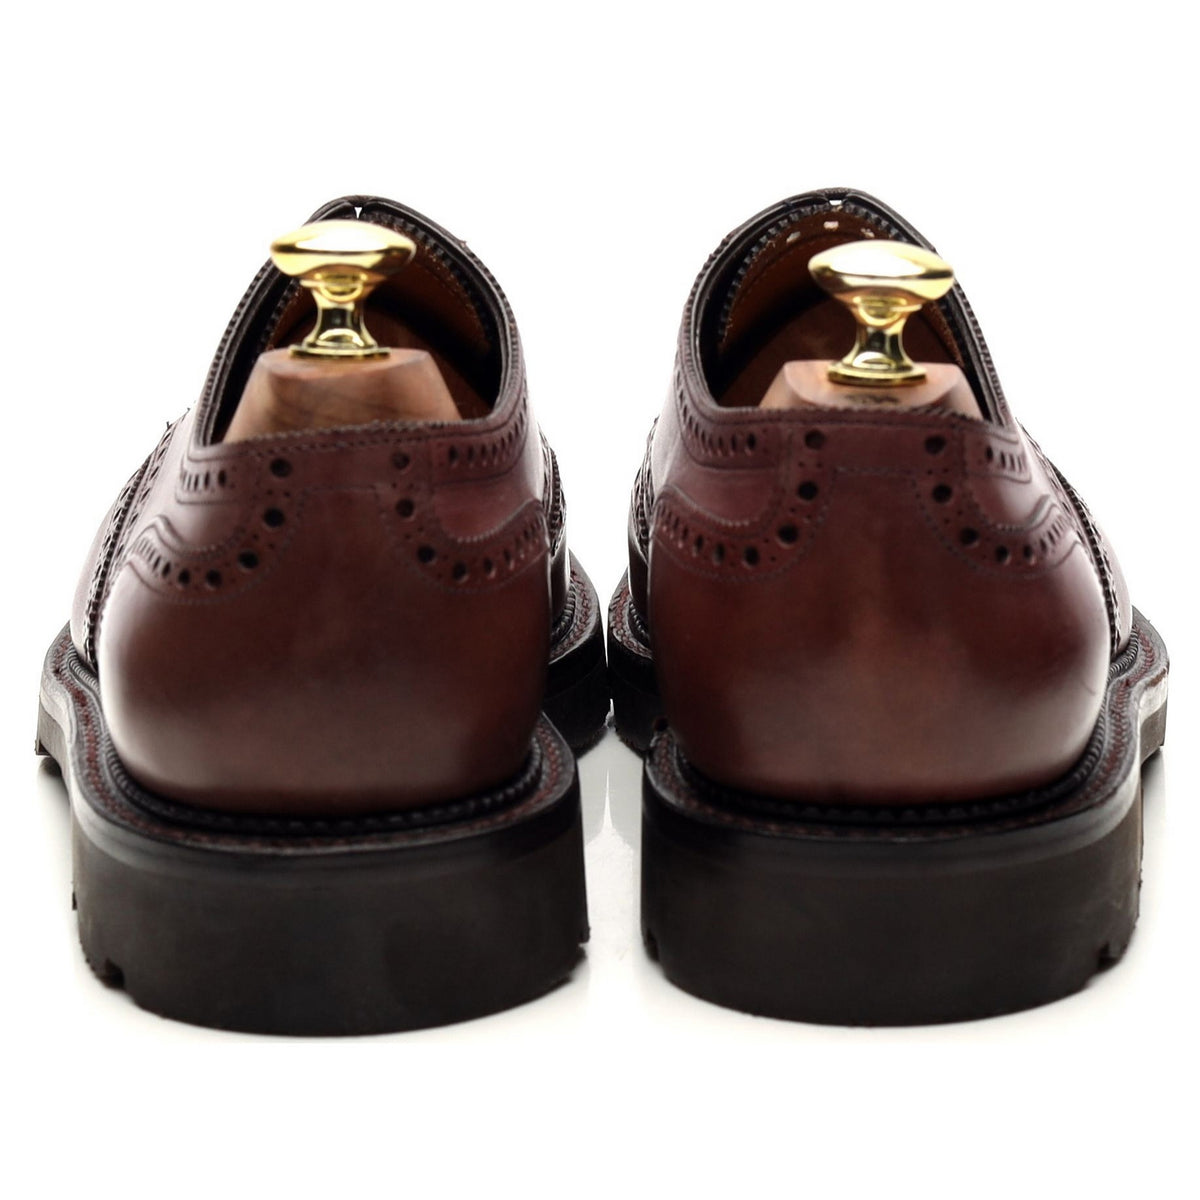 &#39;Hayle&#39; Burgundy Leather Derby Brogues UK 7.5 E